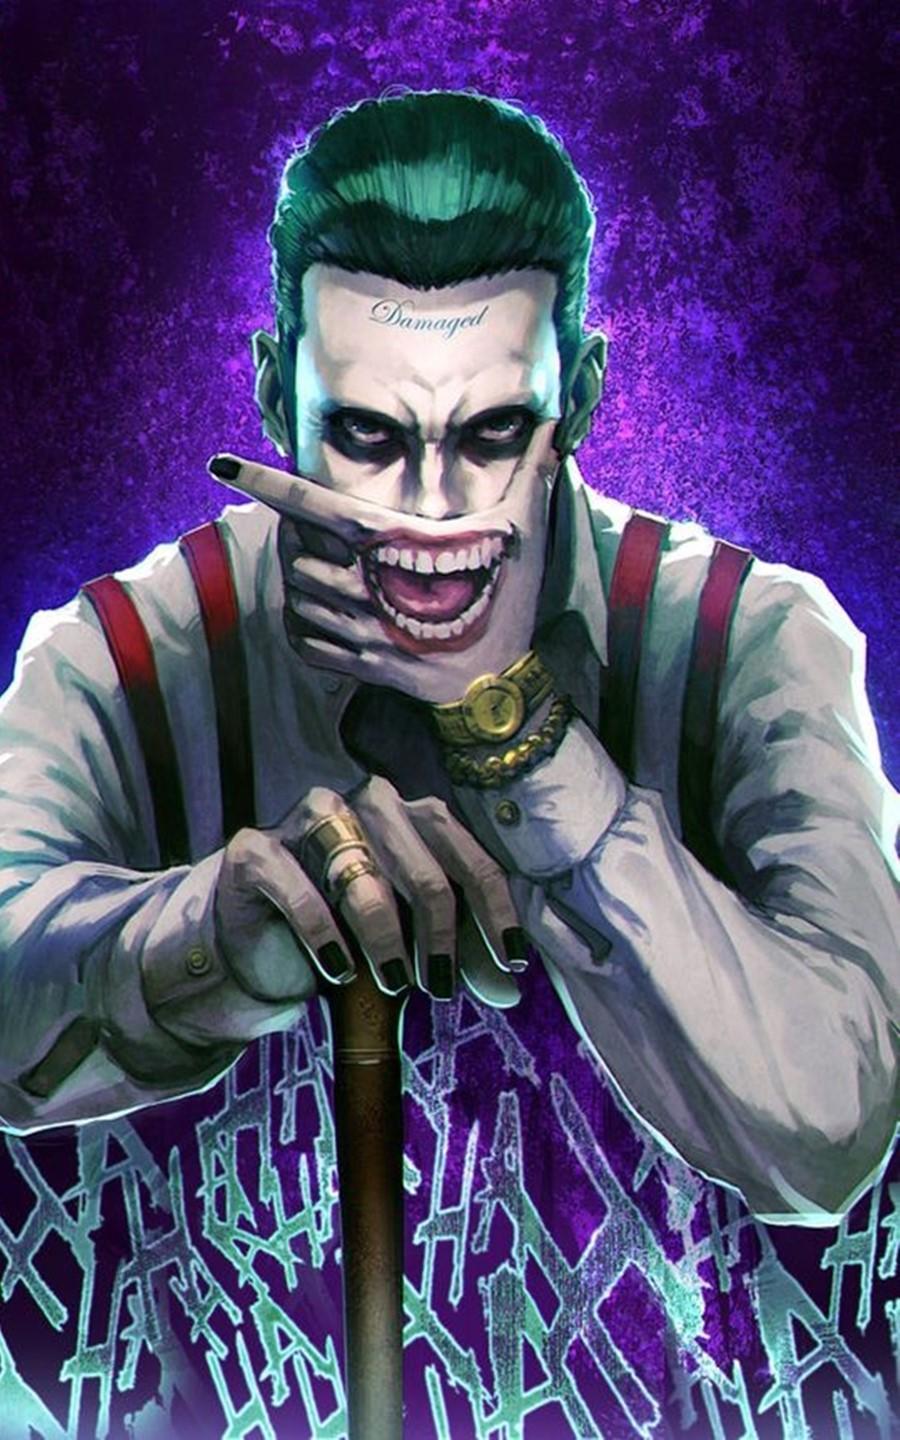  Joker  Wallpapers  HD  for Android APK Download